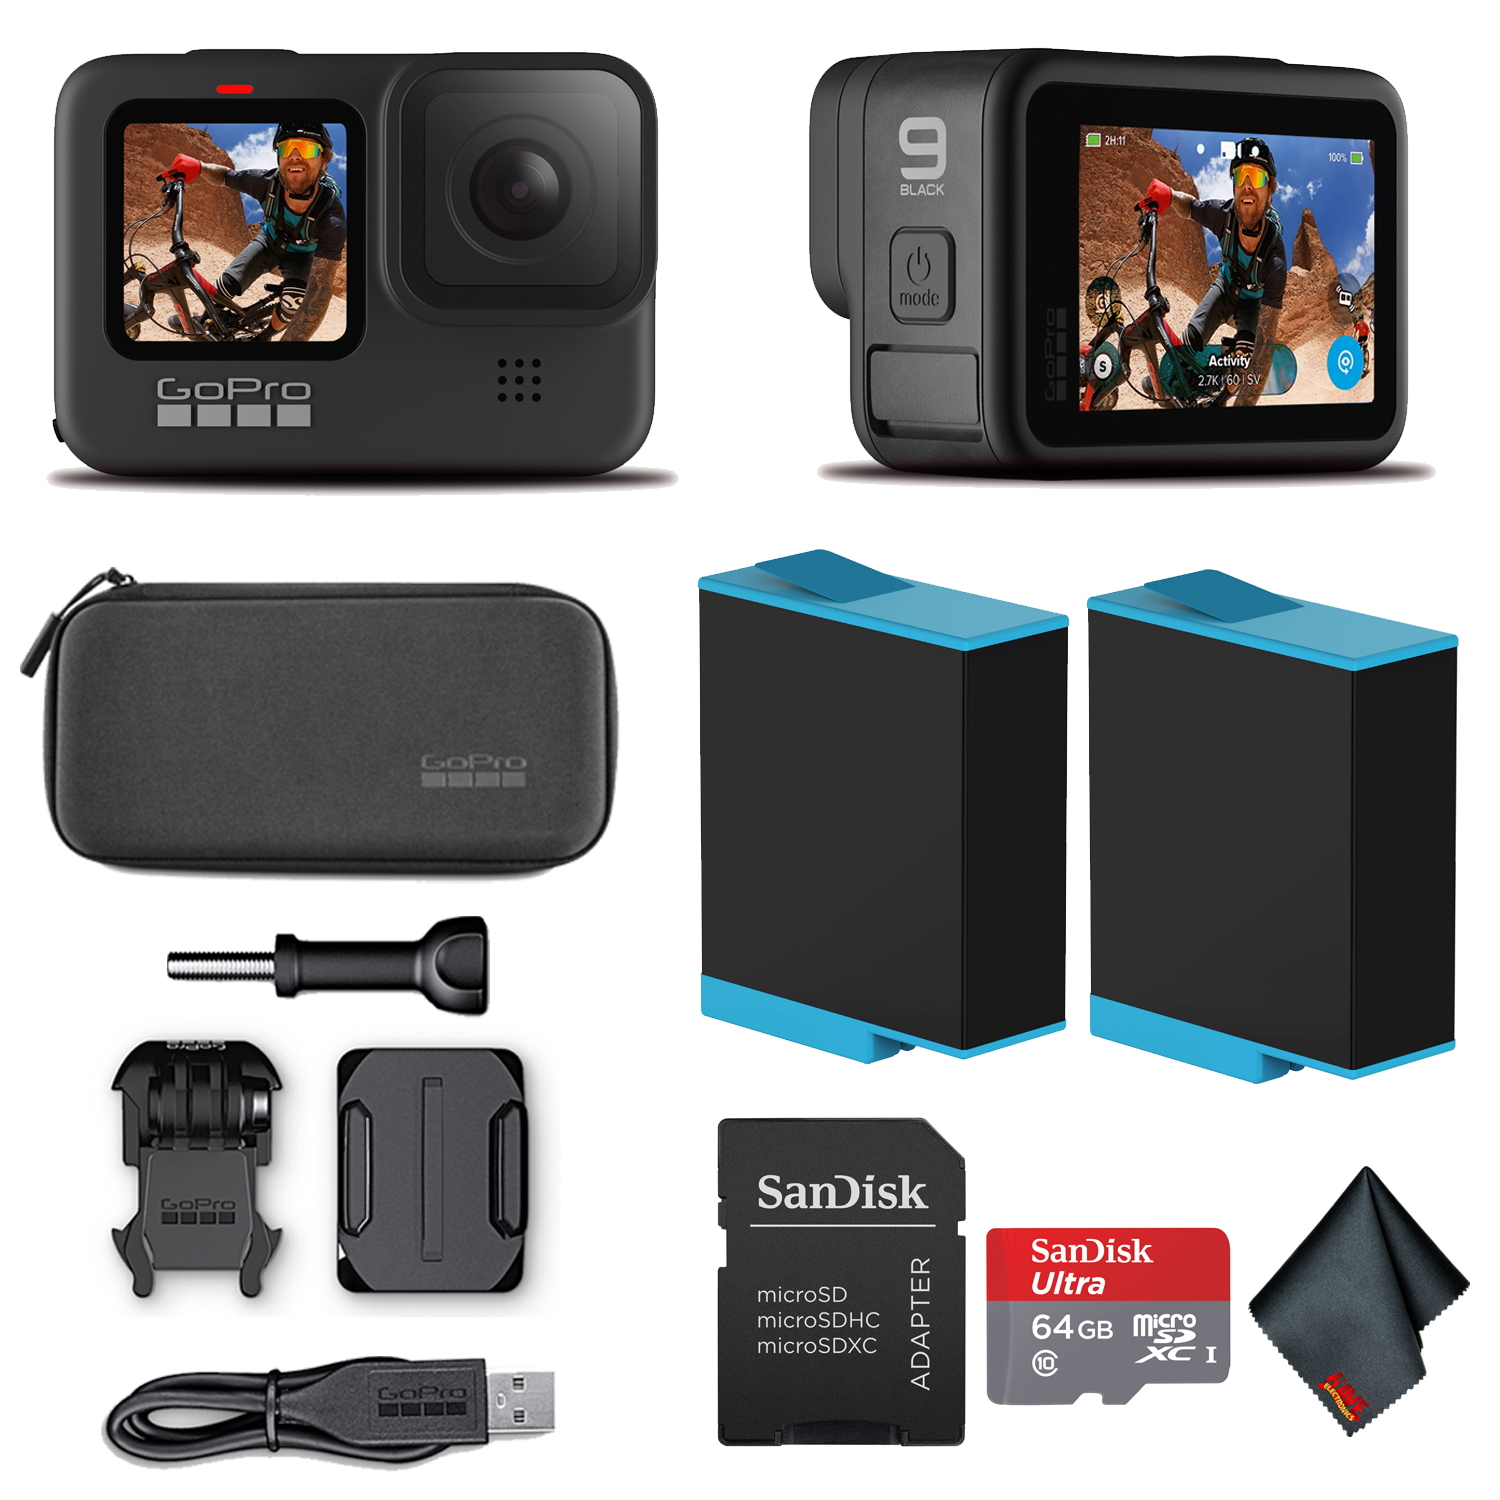 Action　Camera　LCD　Sandisk　with　Card　GoPro　HERO9　Extra　Live　Stabilization　and　20MP　Front　(HERO　Screens,　Video,　5K　9)　64GB　Photos,　Touch　Black　and　Waterproof　HD　Rear　1080p　Streaming,　Battery